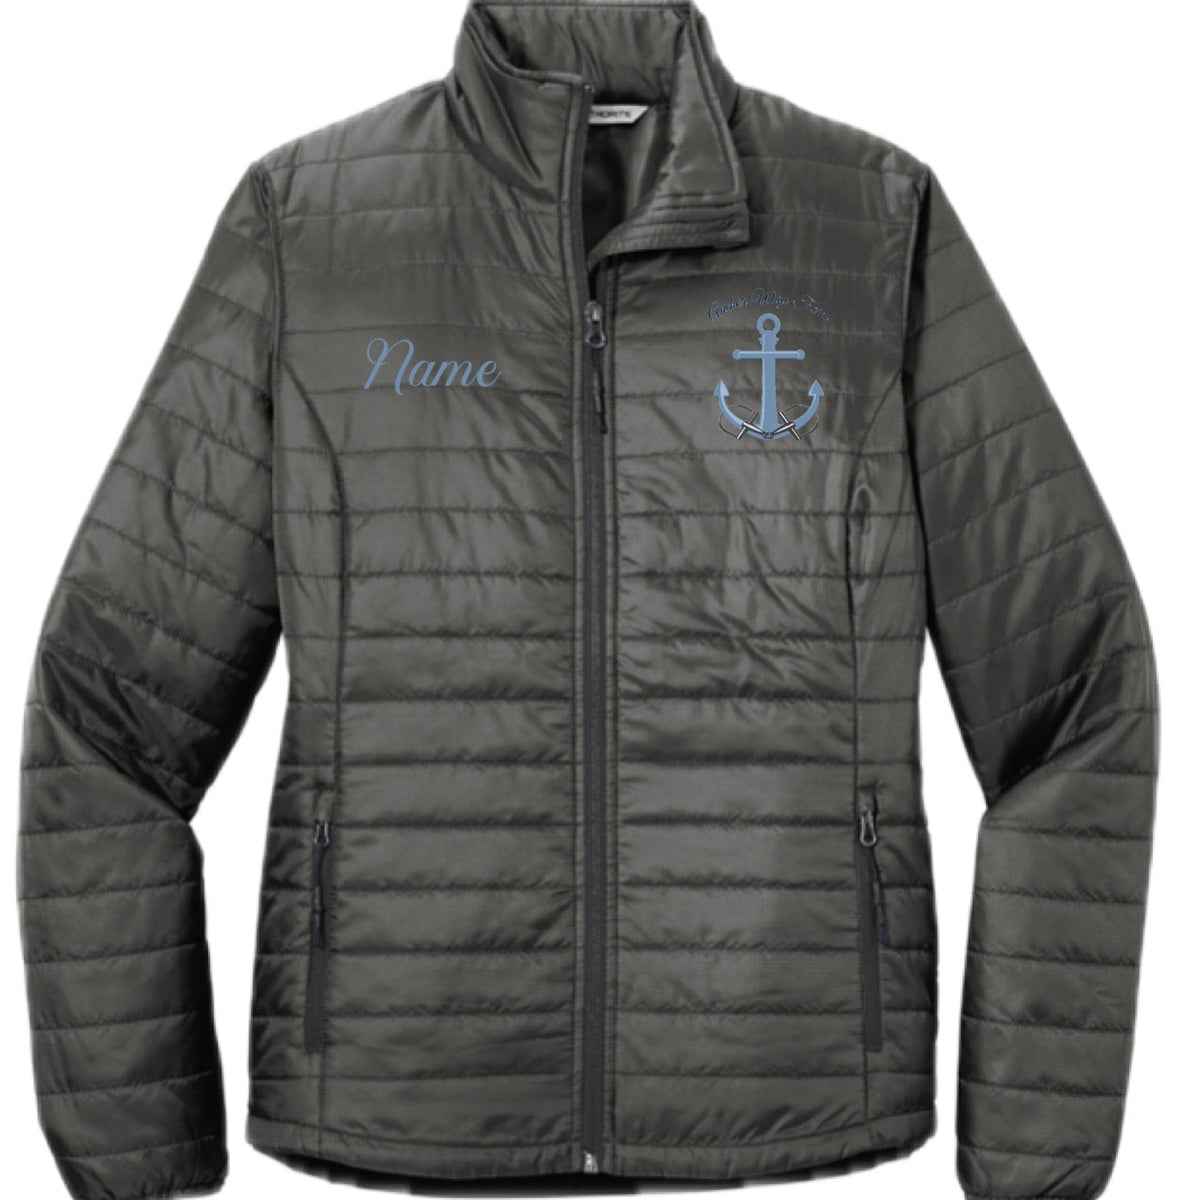 Equestrian Team Apparel Anchor Way Farm Puffy Jacket and Vest equestrian team apparel online tack store mobile tack store custom farm apparel custom show stable clothing equestrian lifestyle horse show clothing riding clothes horses equestrian tack store